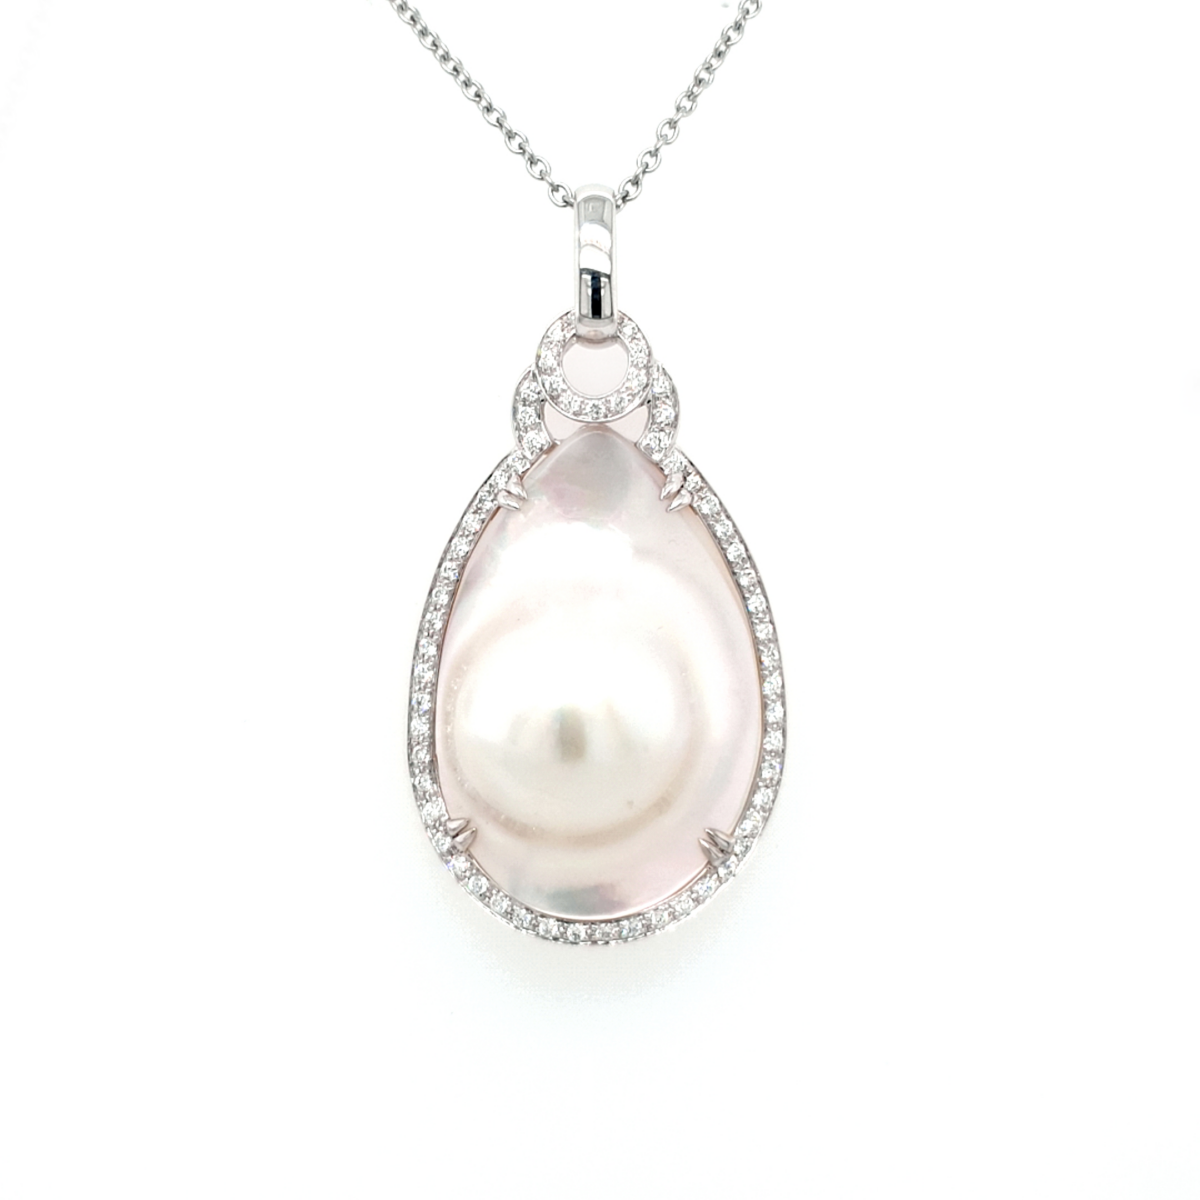 Leon Bakers 18K White Gold Mabe Pearl and Diamond Pendant_0